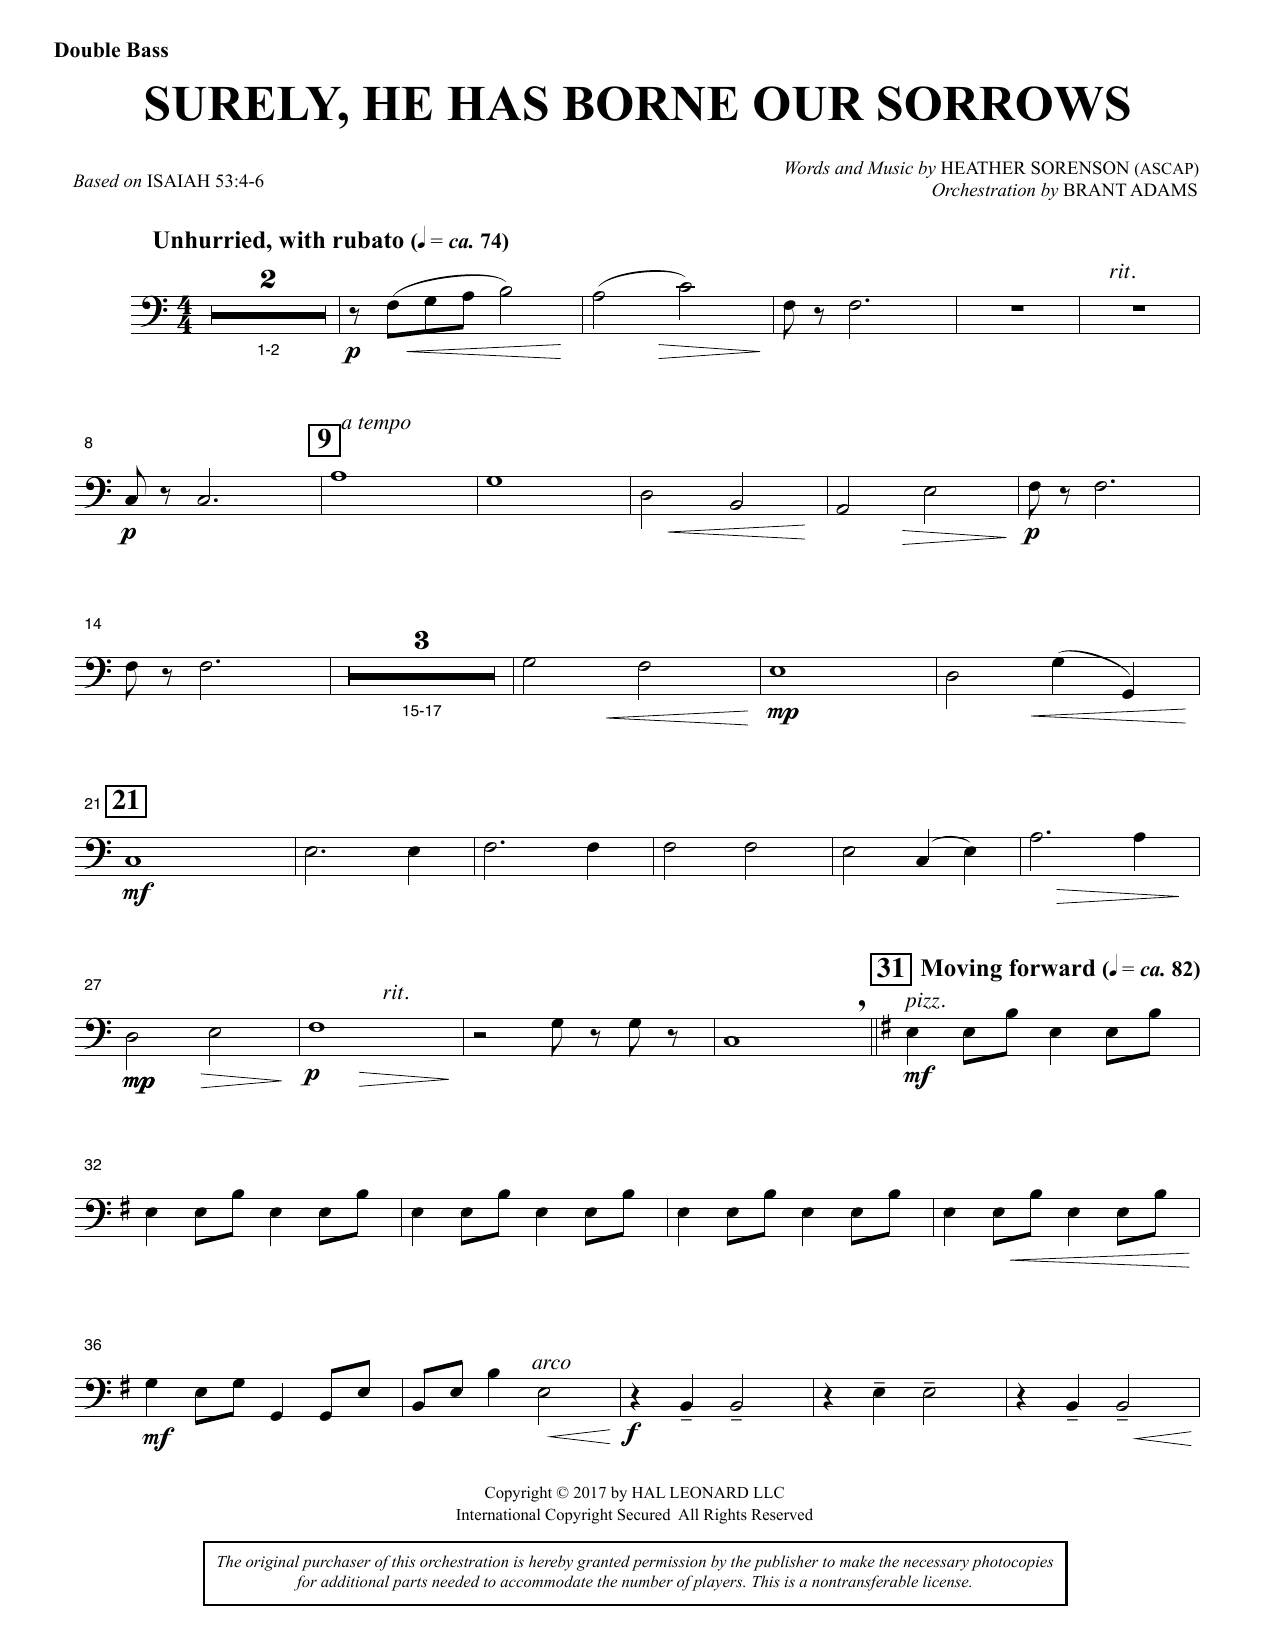 Download Heather Sorenson Surely, He Has Borne Our Sorrows - Doub Sheet Music